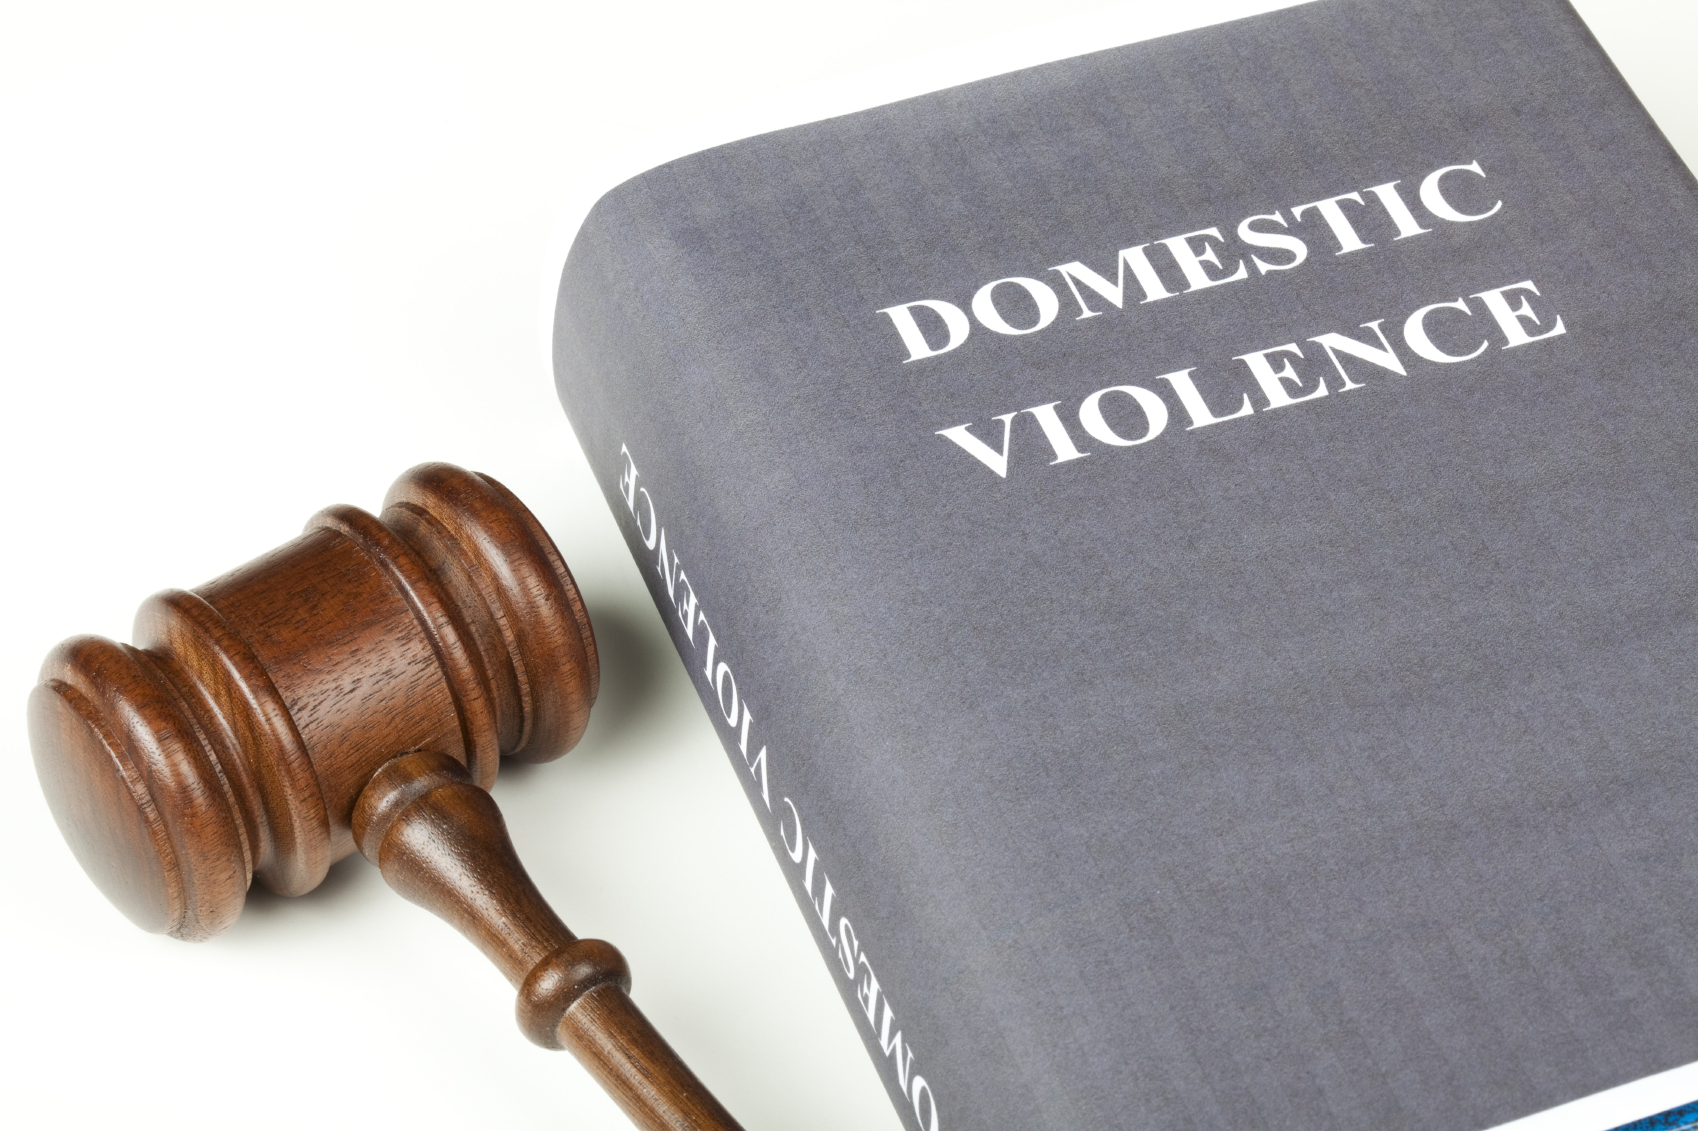 U.S. Attorney: Firearms Used In Most Domestic Violence Deaths